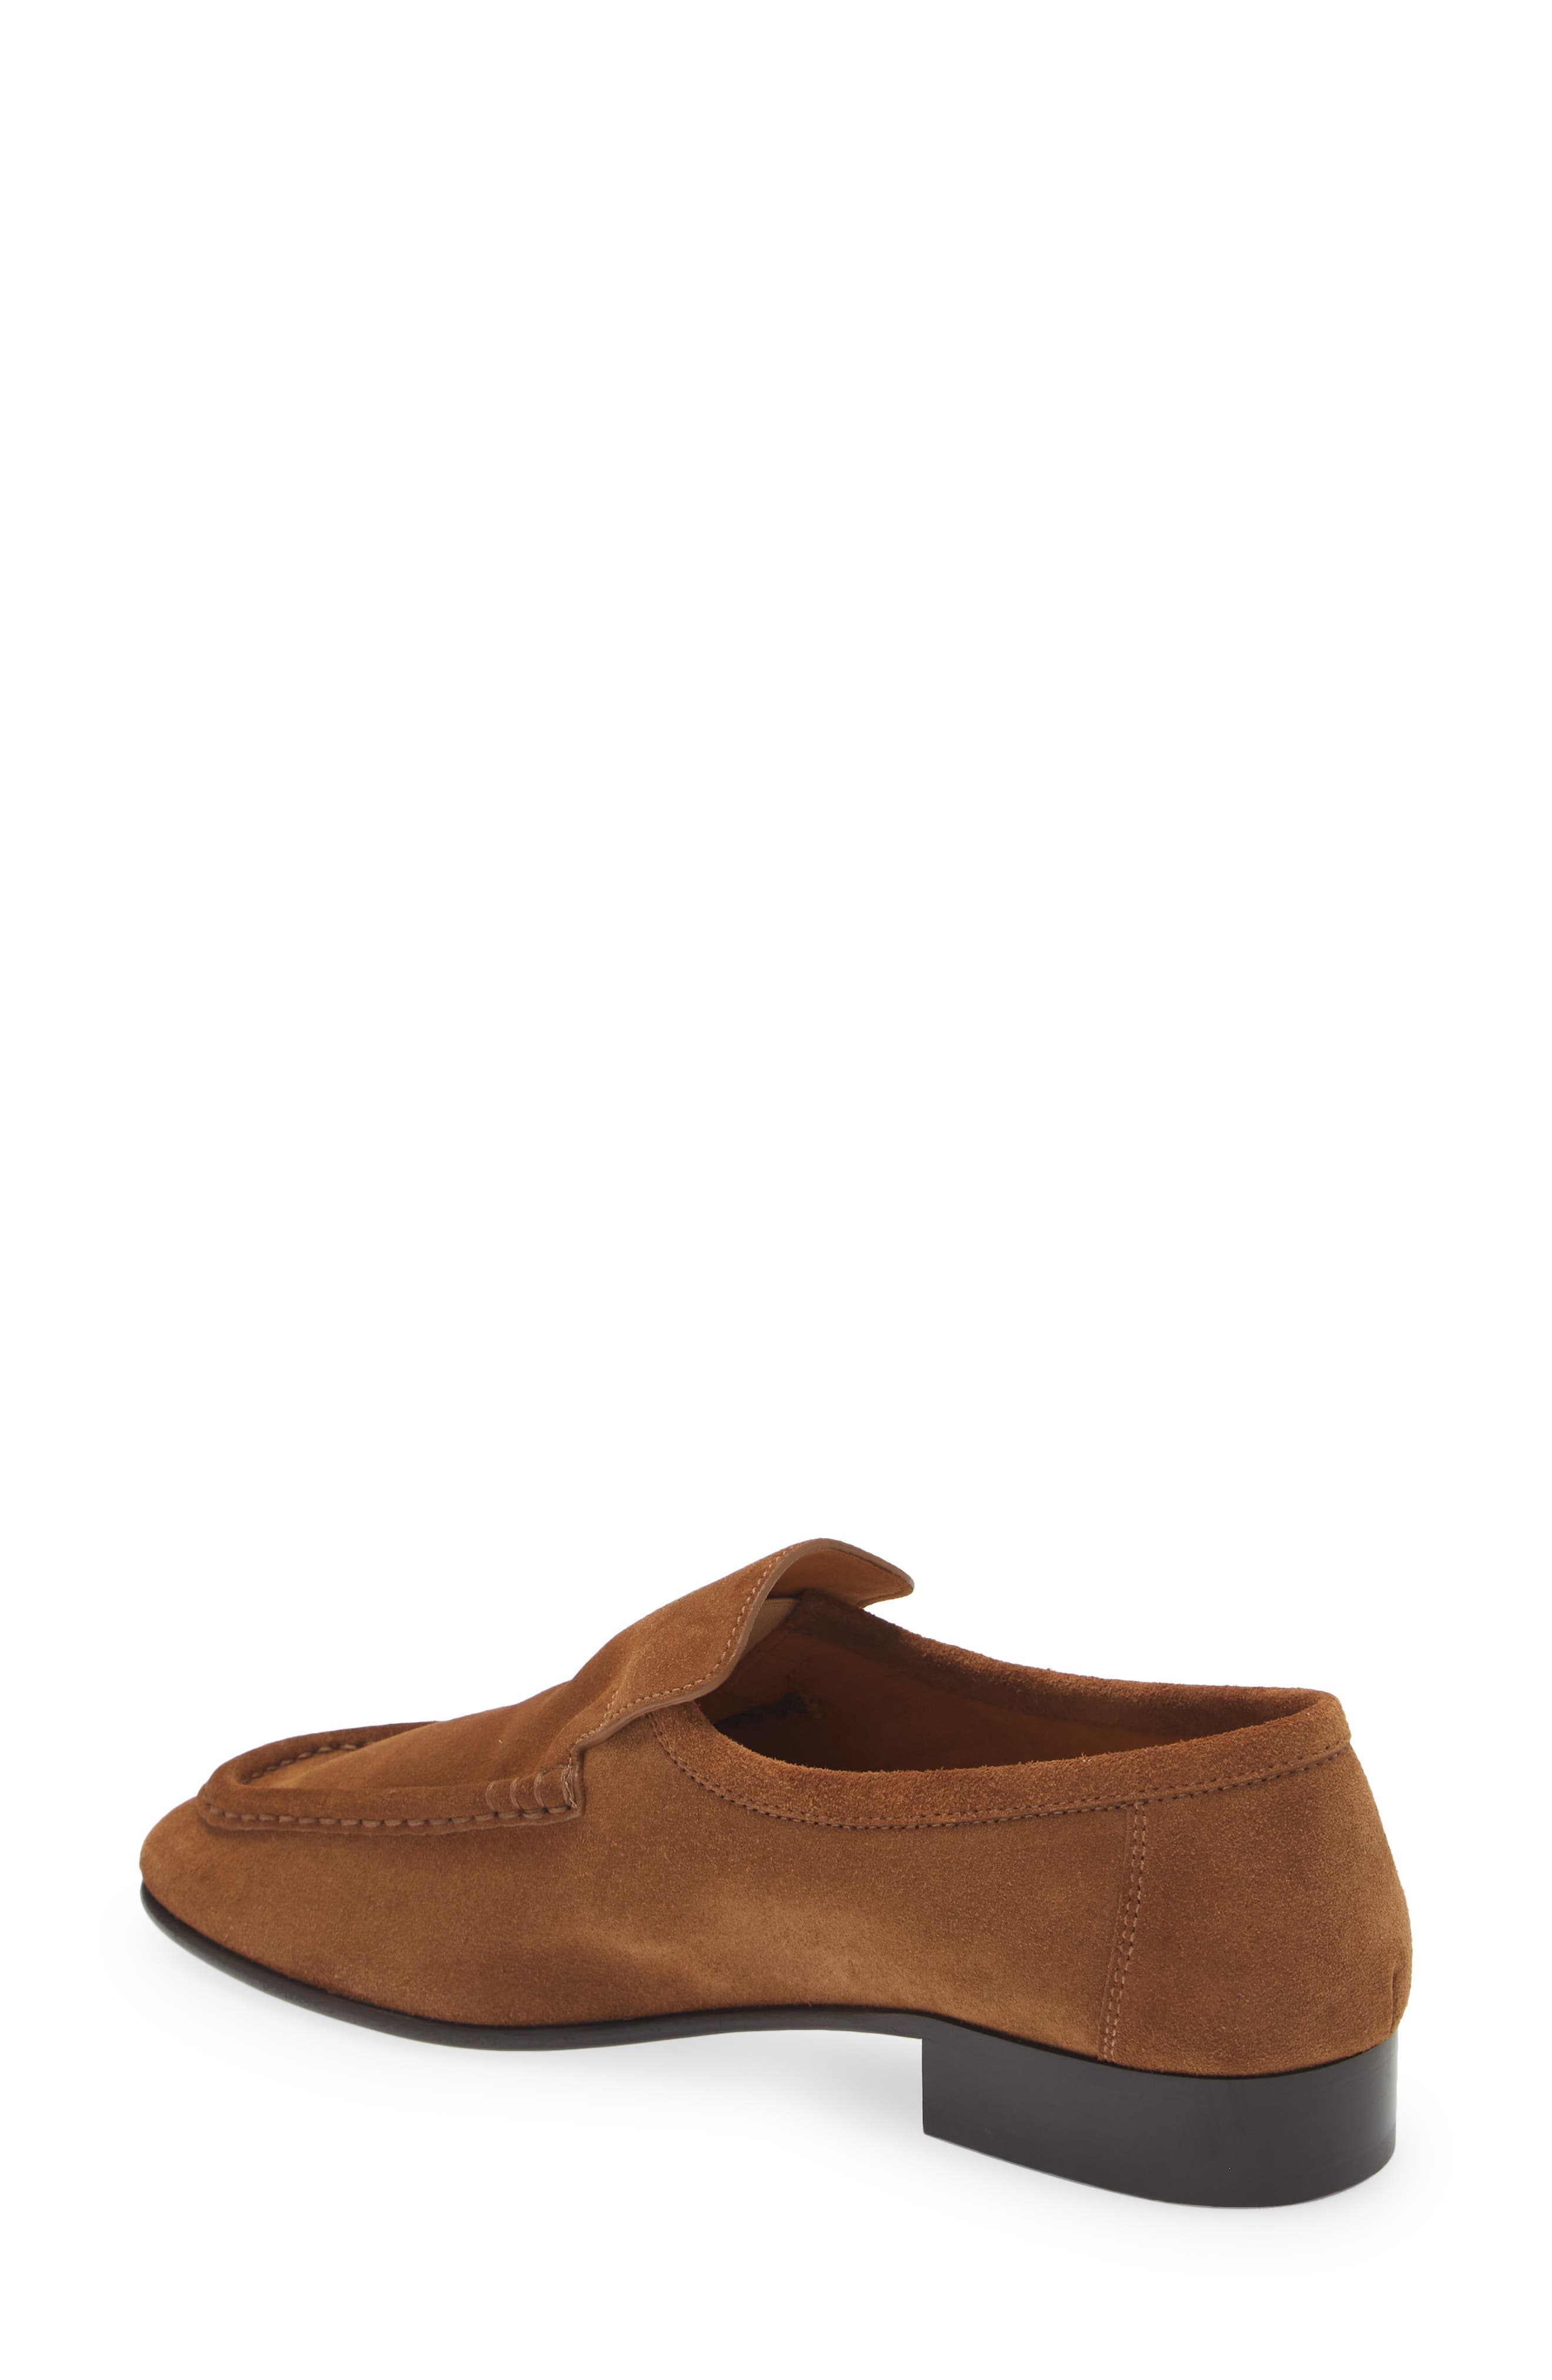 The Row New Soft Loafer in Bark | Smart Closet